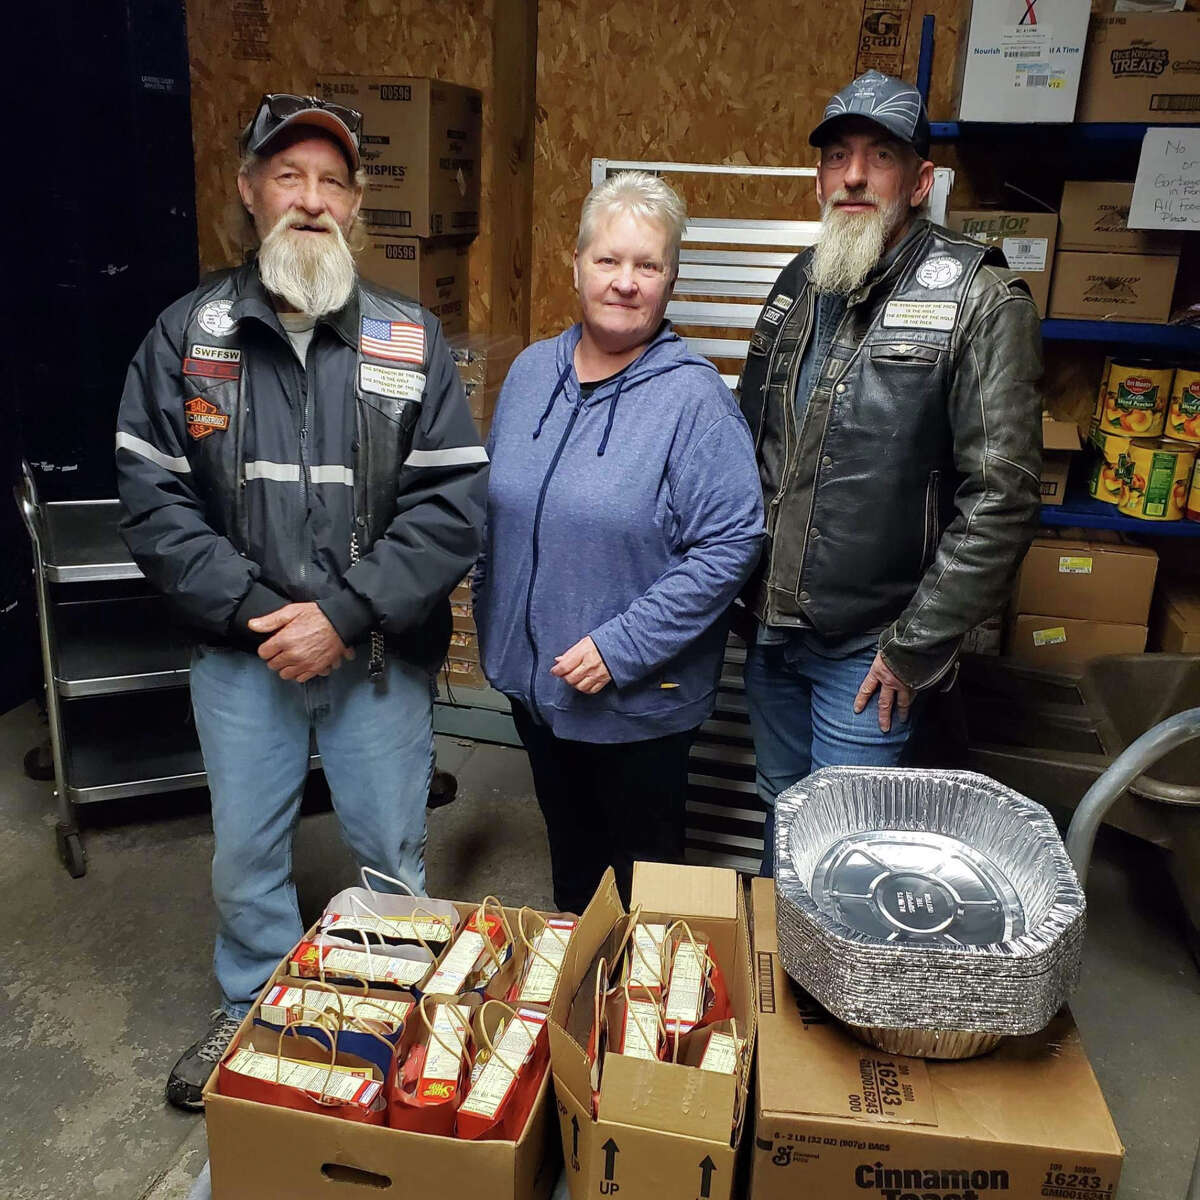 The Sawtooth Wolves Motorcycle Club, of Barryton, works with Fate's Market and other local businesses to provide Thanksgiving dinners to families in need.